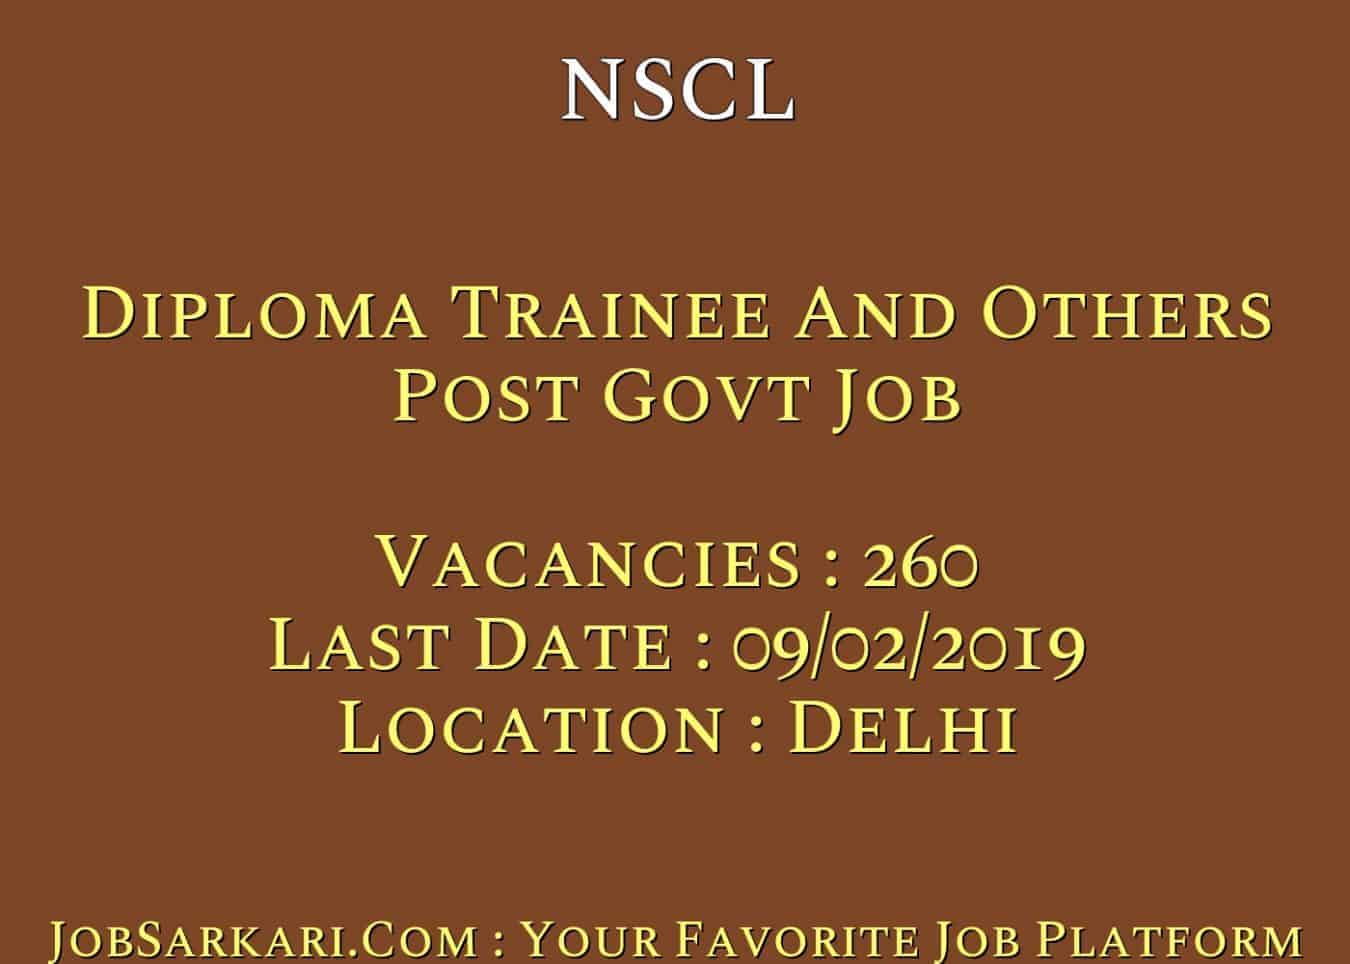 NSCL Recruitment 2019 For Diploma Trainee And Others Post Govt Job